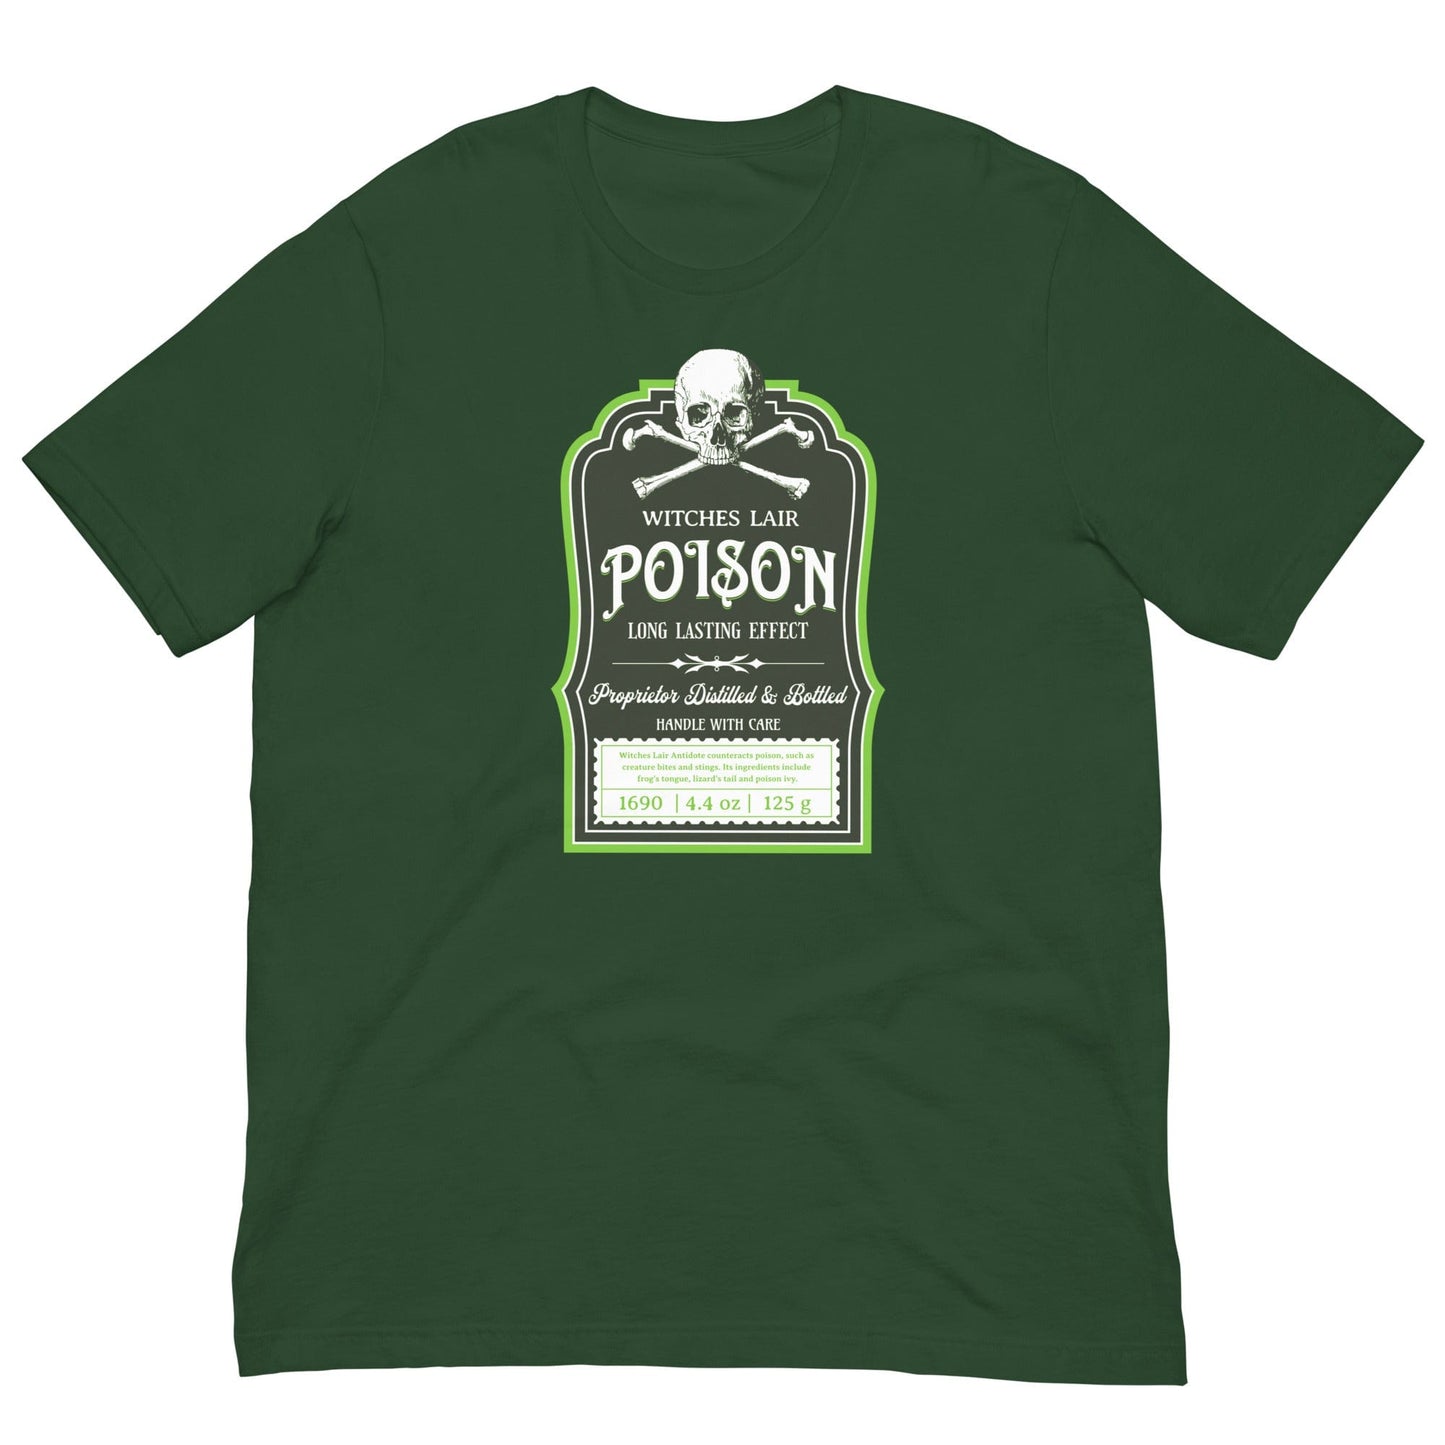 Witches Lair Poison T-shirt Forest / S